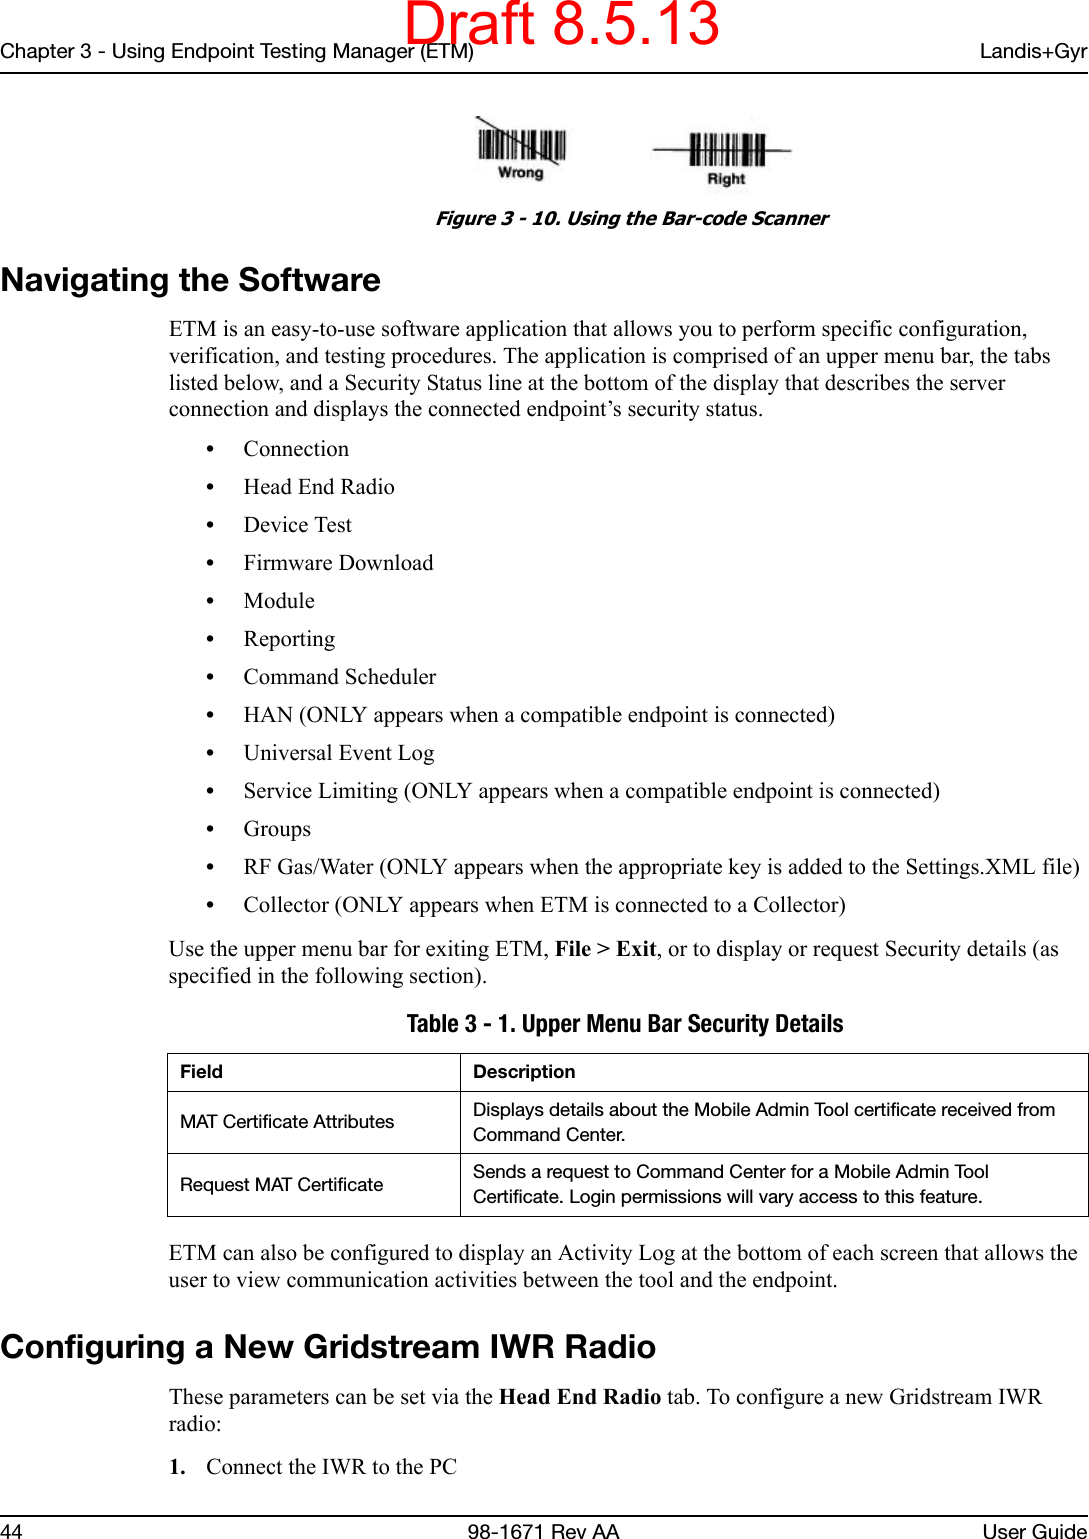 Chapter 3 - Using Endpoint Testing Manager (ETM) Landis+Gyr44 98-1671 Rev AA User Guide Figure 3 - 10. Using the Bar-code ScannerNavigating the SoftwareETM is an easy-to-use software application that allows you to perform specific configuration, verification, and testing procedures. The application is comprised of an upper menu bar, the tabs listed below, and a Security Status line at the bottom of the display that describes the server connection and displays the connected endpoint’s security status.•Connection•Head End Radio•Device Test•Firmware Download•Module•Reporting•Command Scheduler•HAN (ONLY appears when a compatible endpoint is connected)•Universal Event Log•Service Limiting (ONLY appears when a compatible endpoint is connected)•Groups•RF Gas/Water (ONLY appears when the appropriate key is added to the Settings.XML file)•Collector (ONLY appears when ETM is connected to a Collector)Use the upper menu bar for exiting ETM, File &gt; Exit, or to display or request Security details (as specified in the following section).ETM can also be configured to display an Activity Log at the bottom of each screen that allows the user to view communication activities between the tool and the endpoint.Configuring a New Gridstream IWR RadioThese parameters can be set via the Head End Radio tab. To configure a new Gridstream IWR radio:1. Connect the IWR to the PC Table 3 - 1. Upper Menu Bar Security Details Field DescriptionMAT Certificate Attributes Displays details about the Mobile Admin Tool certificate received from Command Center.Request MAT Certificate Sends a request to Command Center for a Mobile Admin Tool Certificate. Login permissions will vary access to this feature.Draft 8.5.13